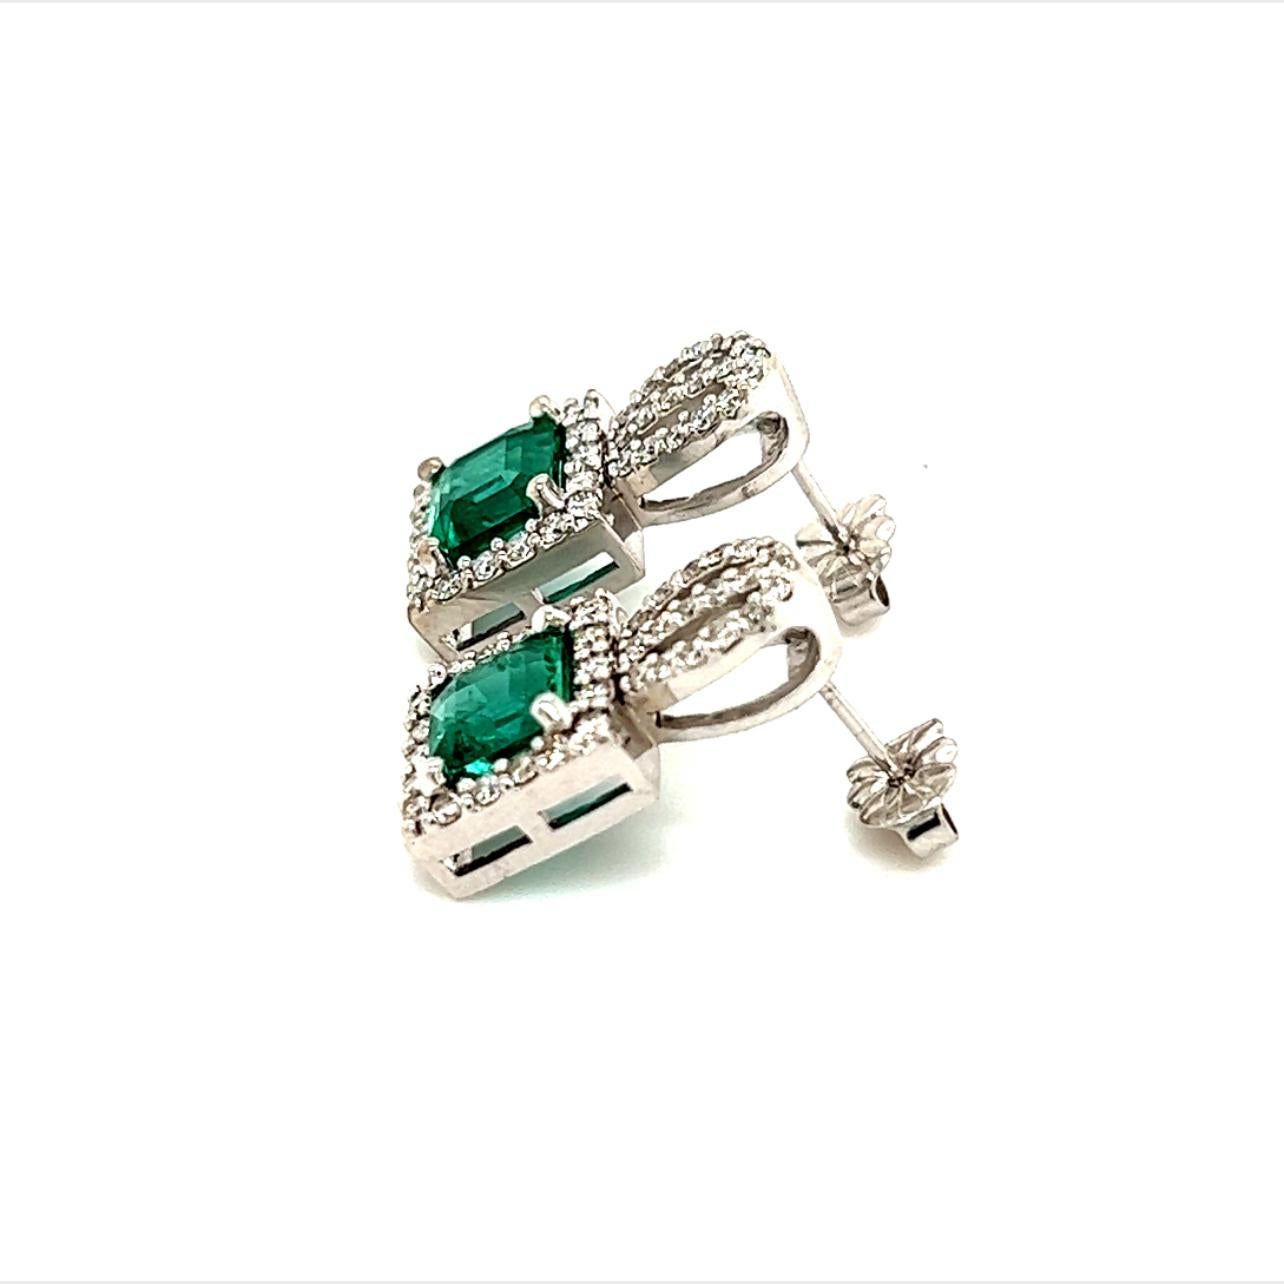 Natural Emerald Diamond Stud Earrings 14k Gold 2.84 TCW Certified $8,950 215407

This is a Unique Custom Made Glamorous Piece of Jewelry!

Nothing says, 